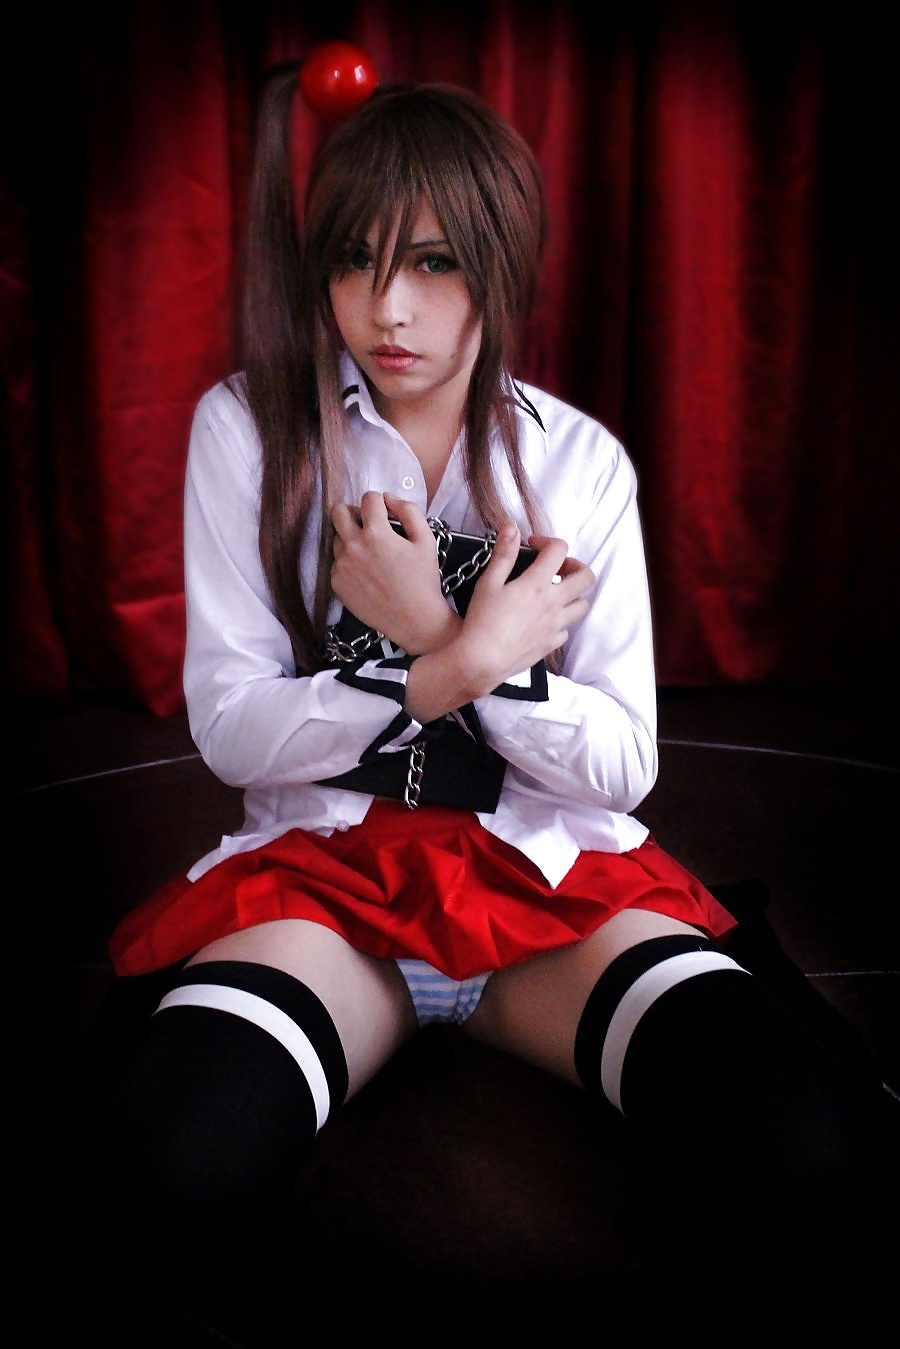 Bible Black collections one of my fav hentai :3 #31800357